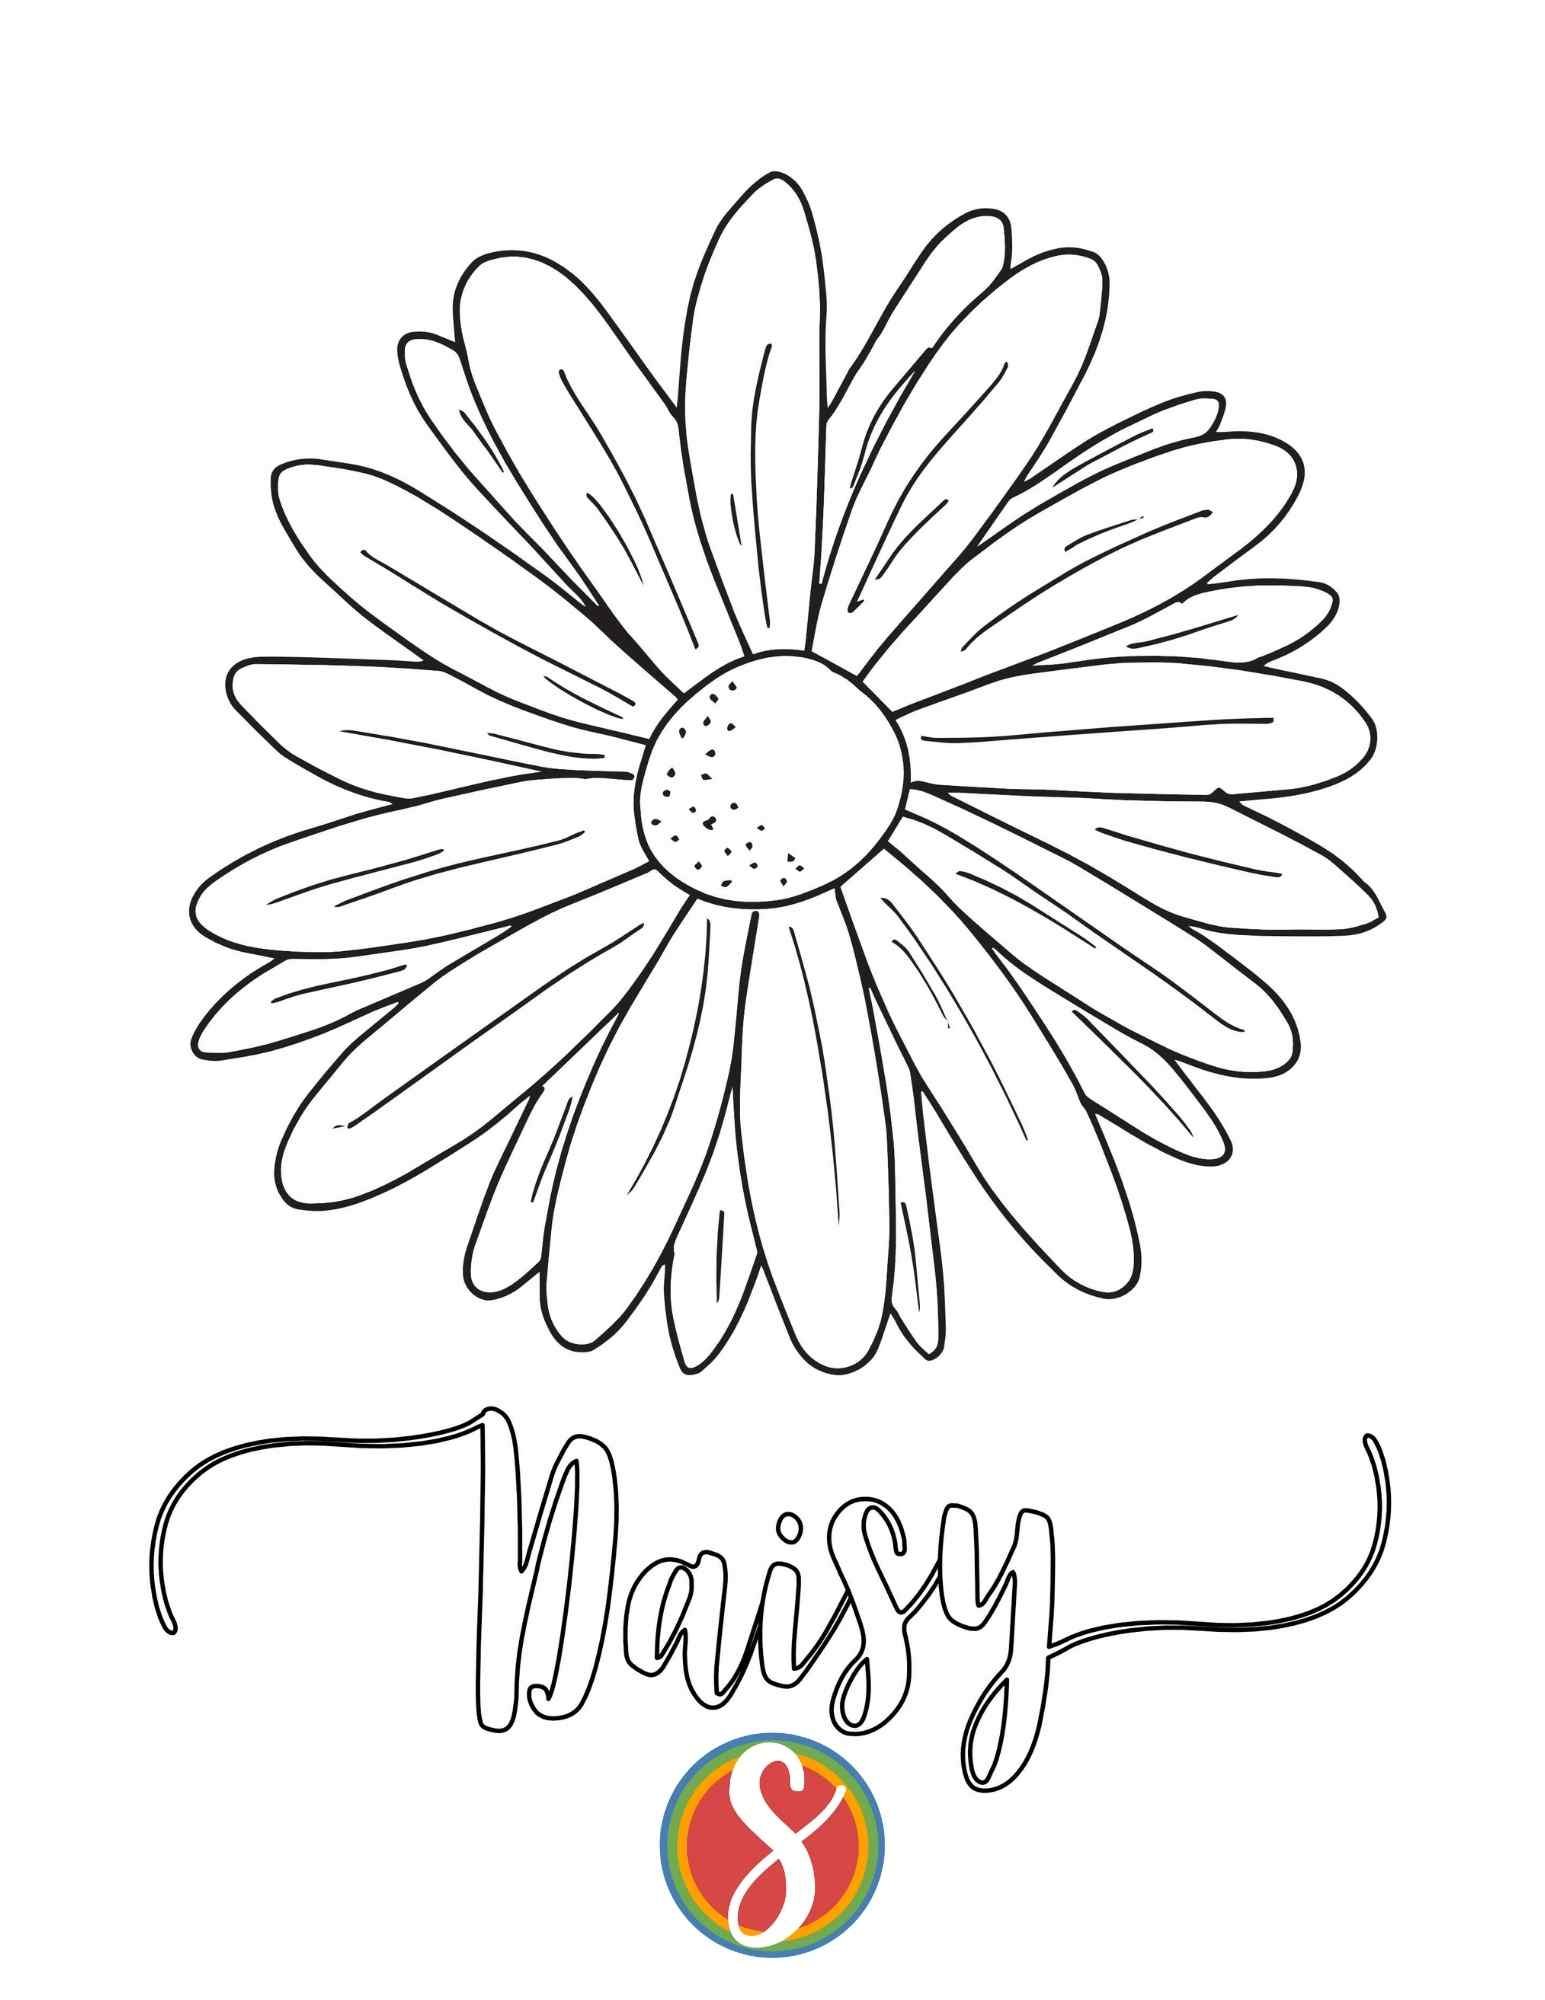 a large daisy flower to color and colorable word "daisy" in script below